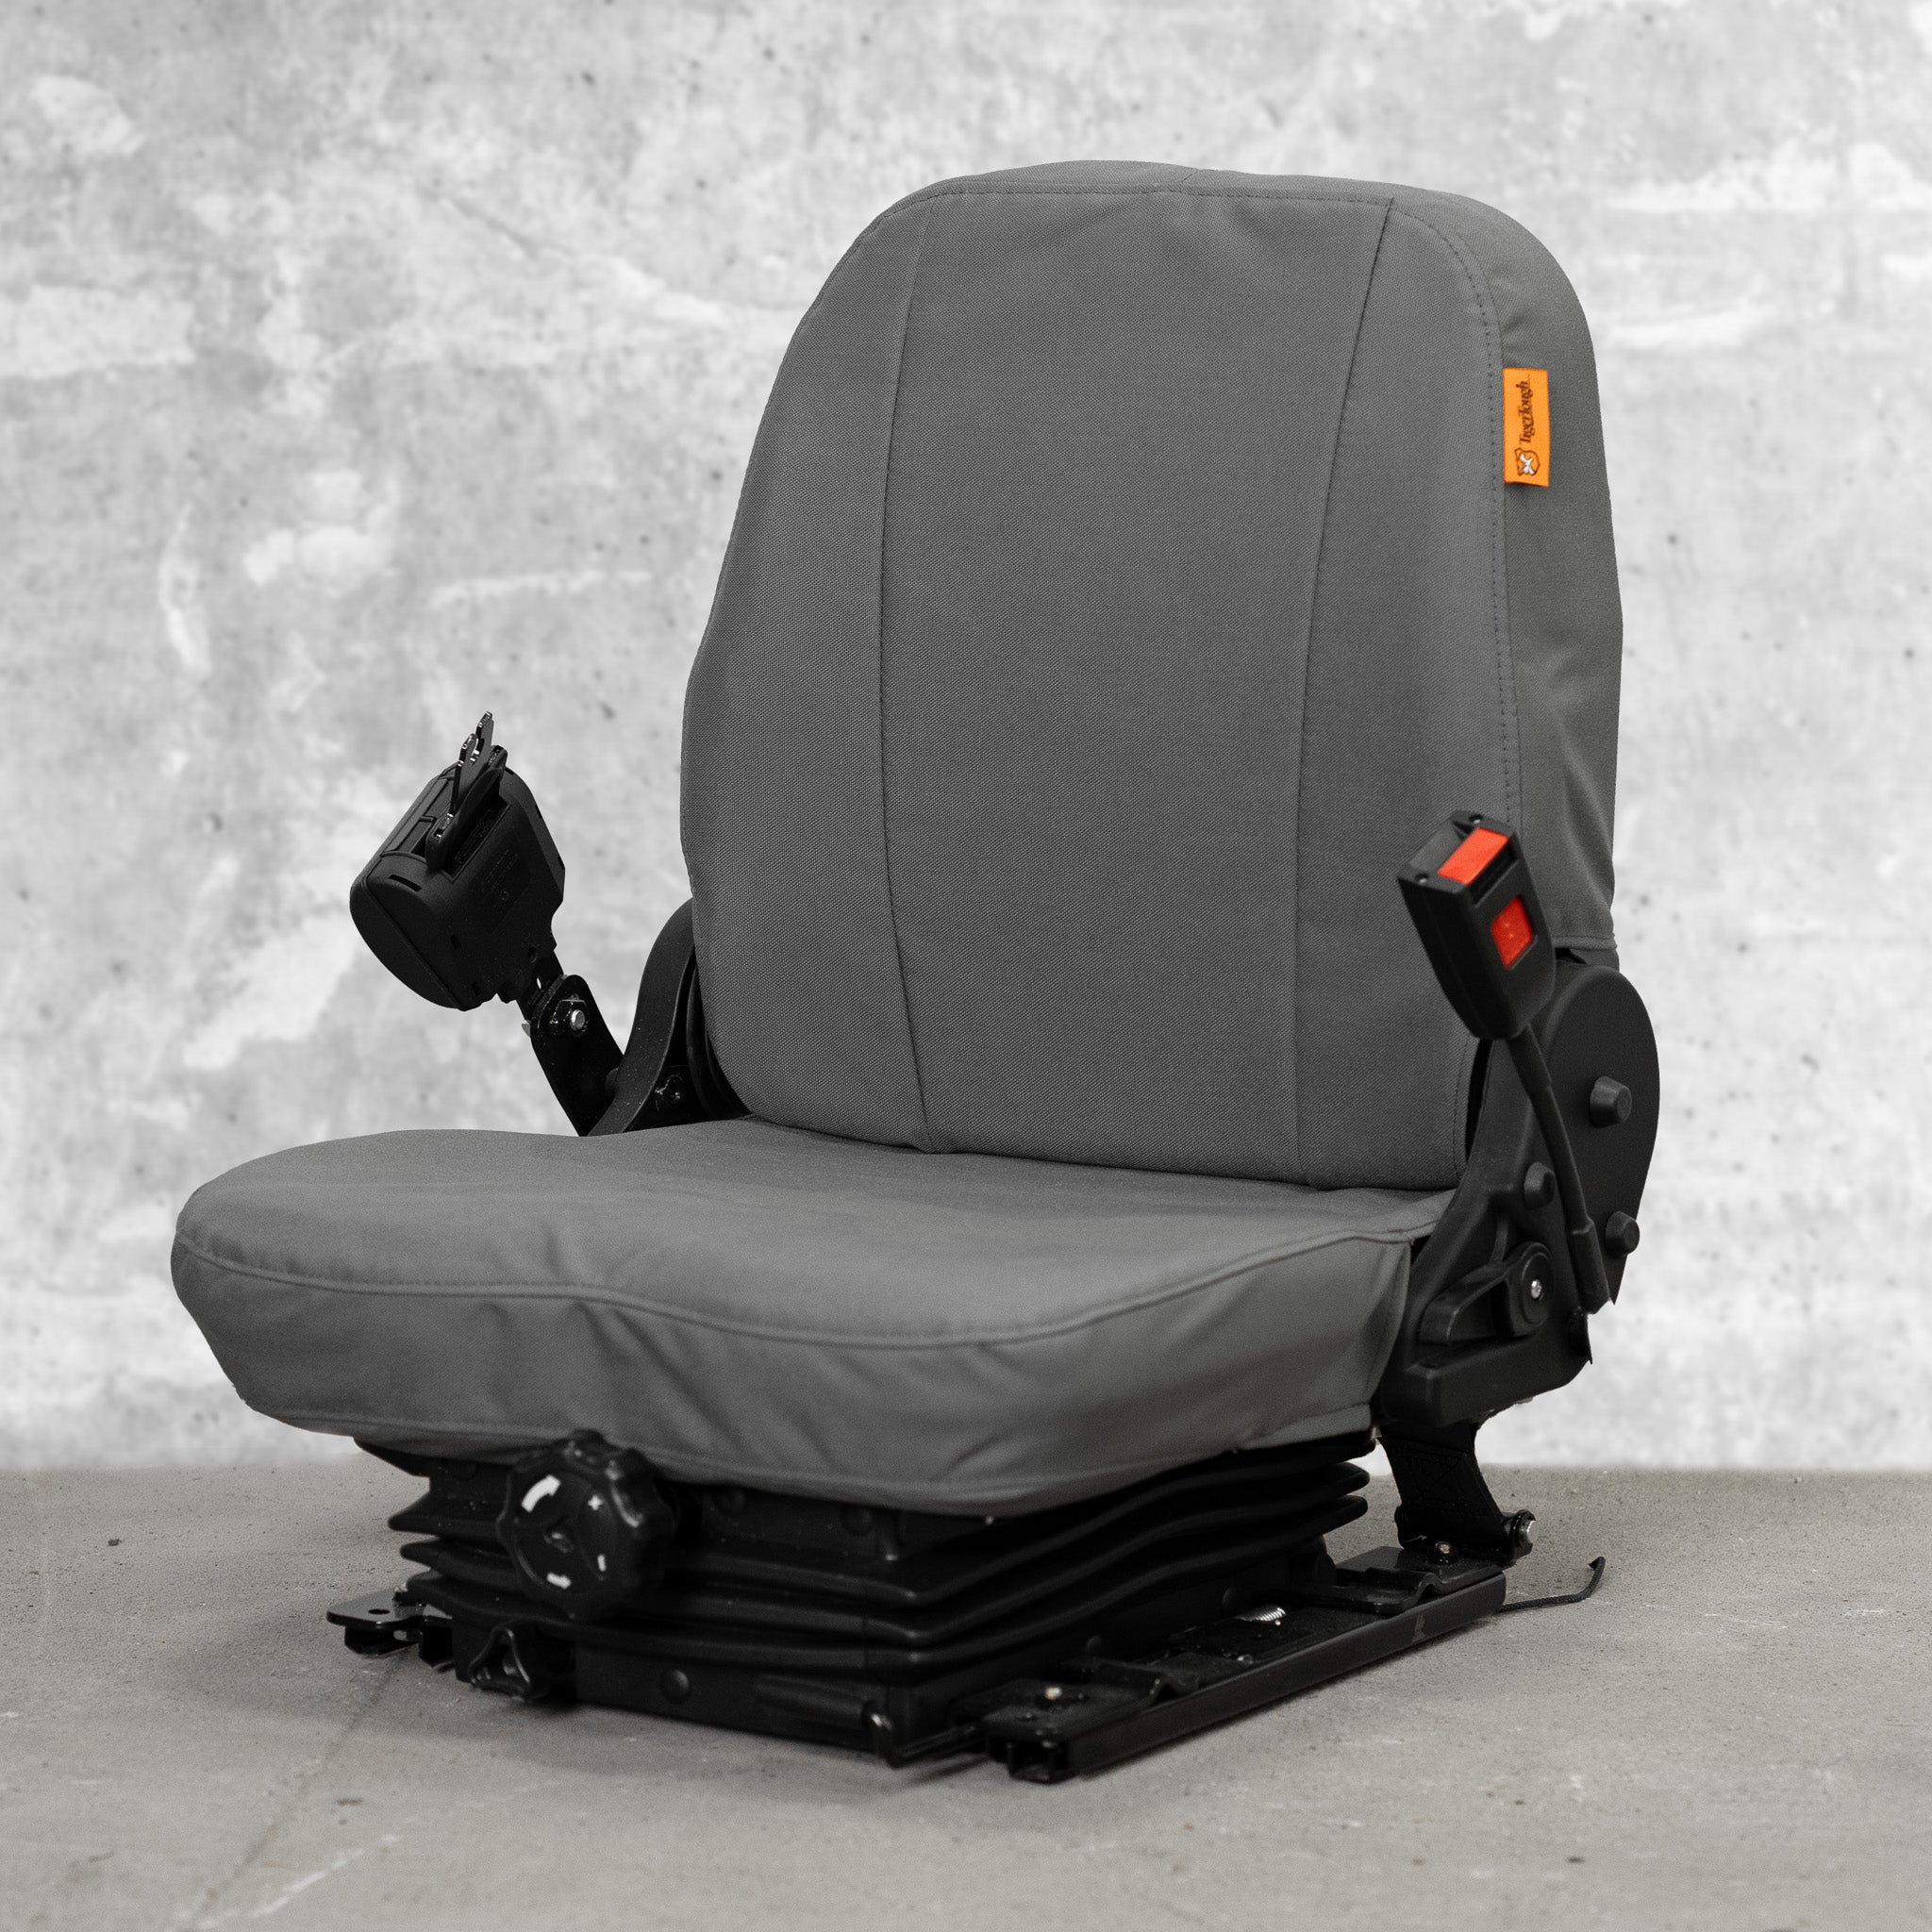 A TigerTough Heavy Equipment Seat Cover that customers have been loving.